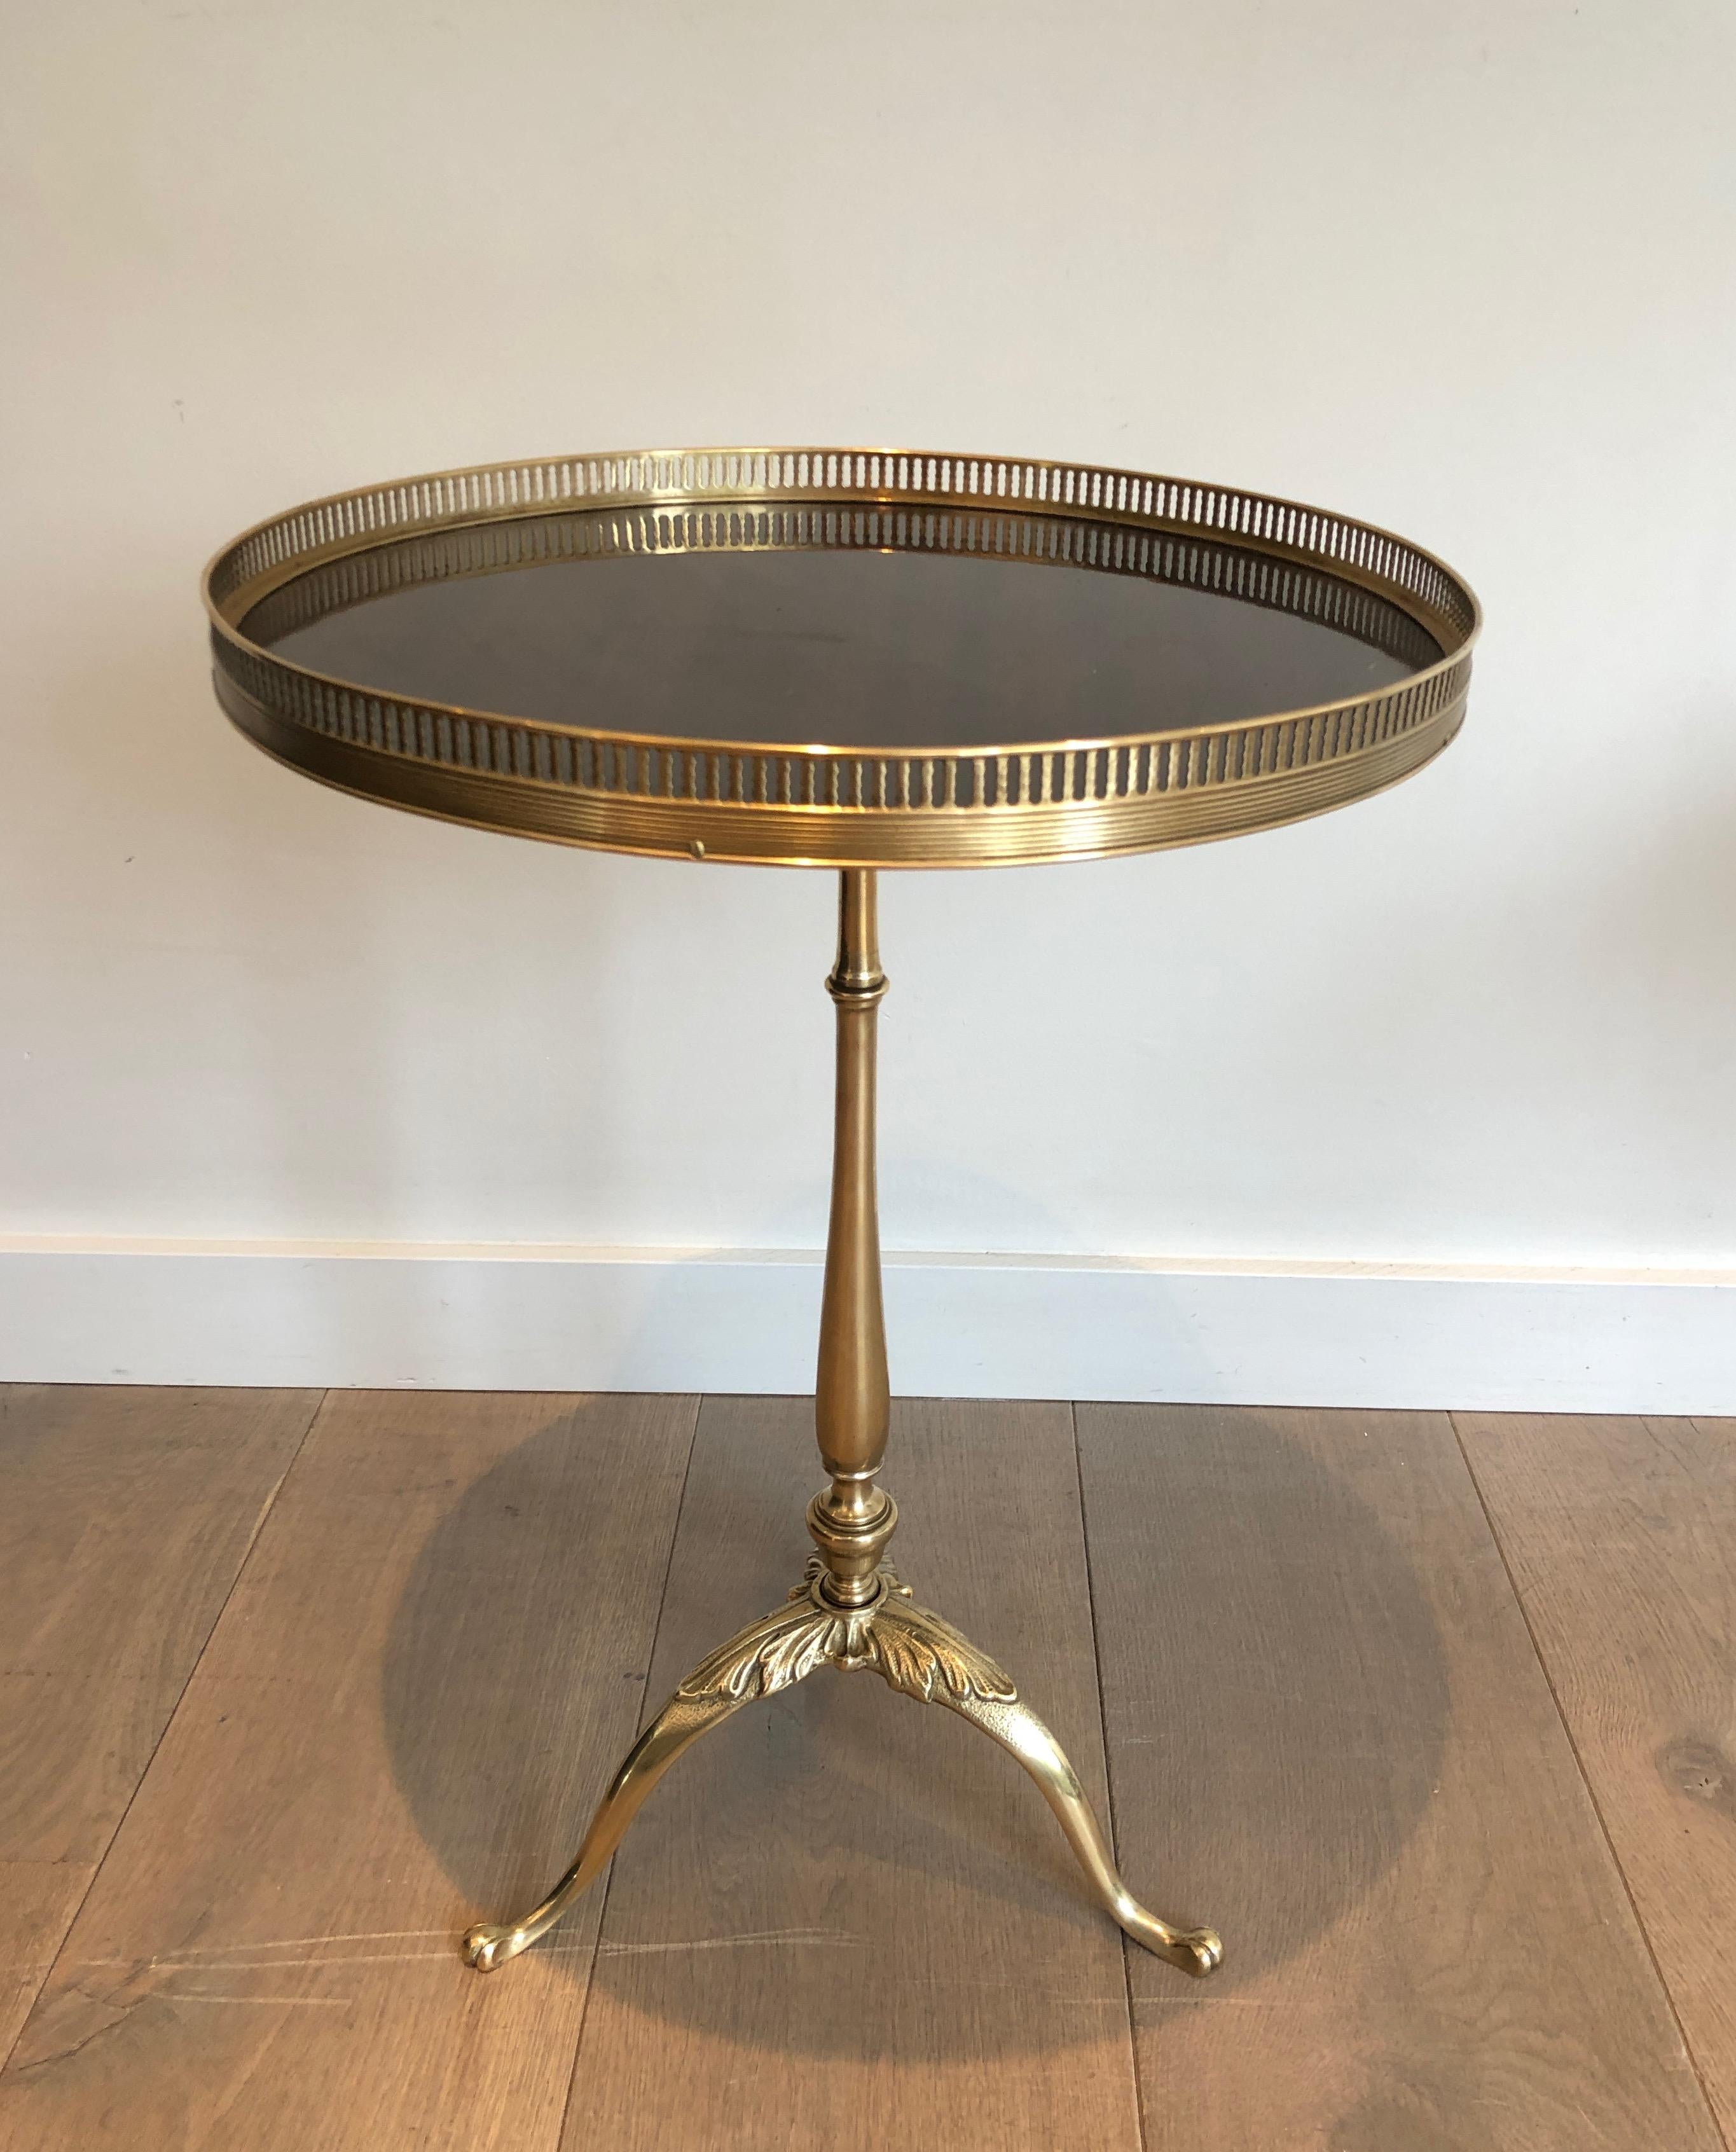 This nice neoclassical style side table also called Martini table is made of brass and mahogany. This end table is attributed to famous French designer Maison Jansen, circa 1940
We have 3 of these tables.